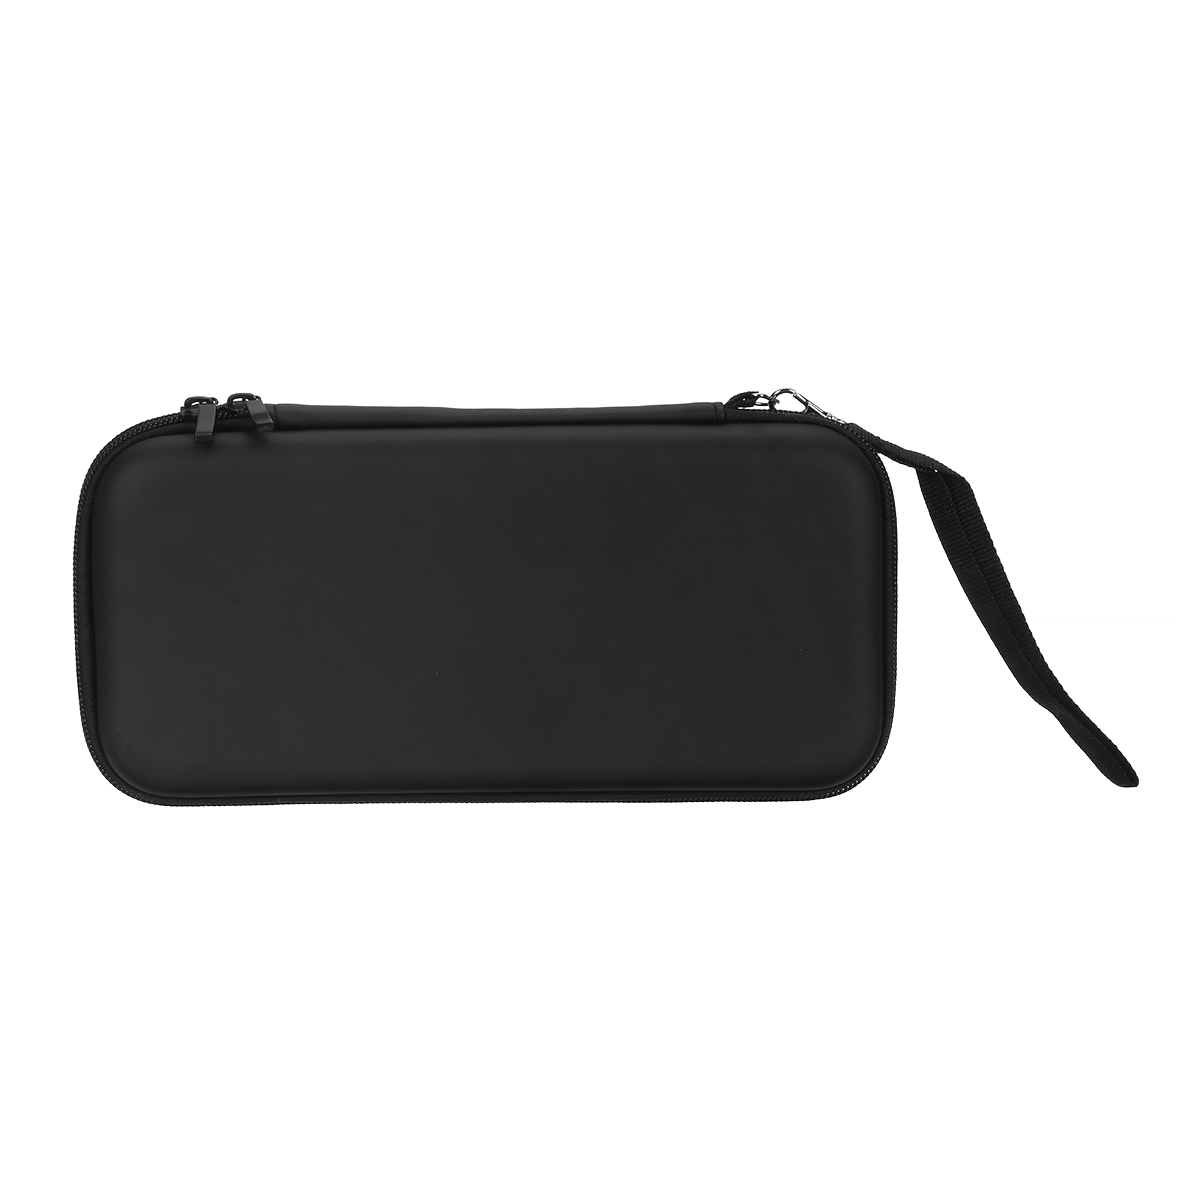 12-in-1-Storage-Bag-Shell-Cover-Protective-Film-Carry-Case-Headset-for-Nintendo-Switch-Game-Console-1698705-6